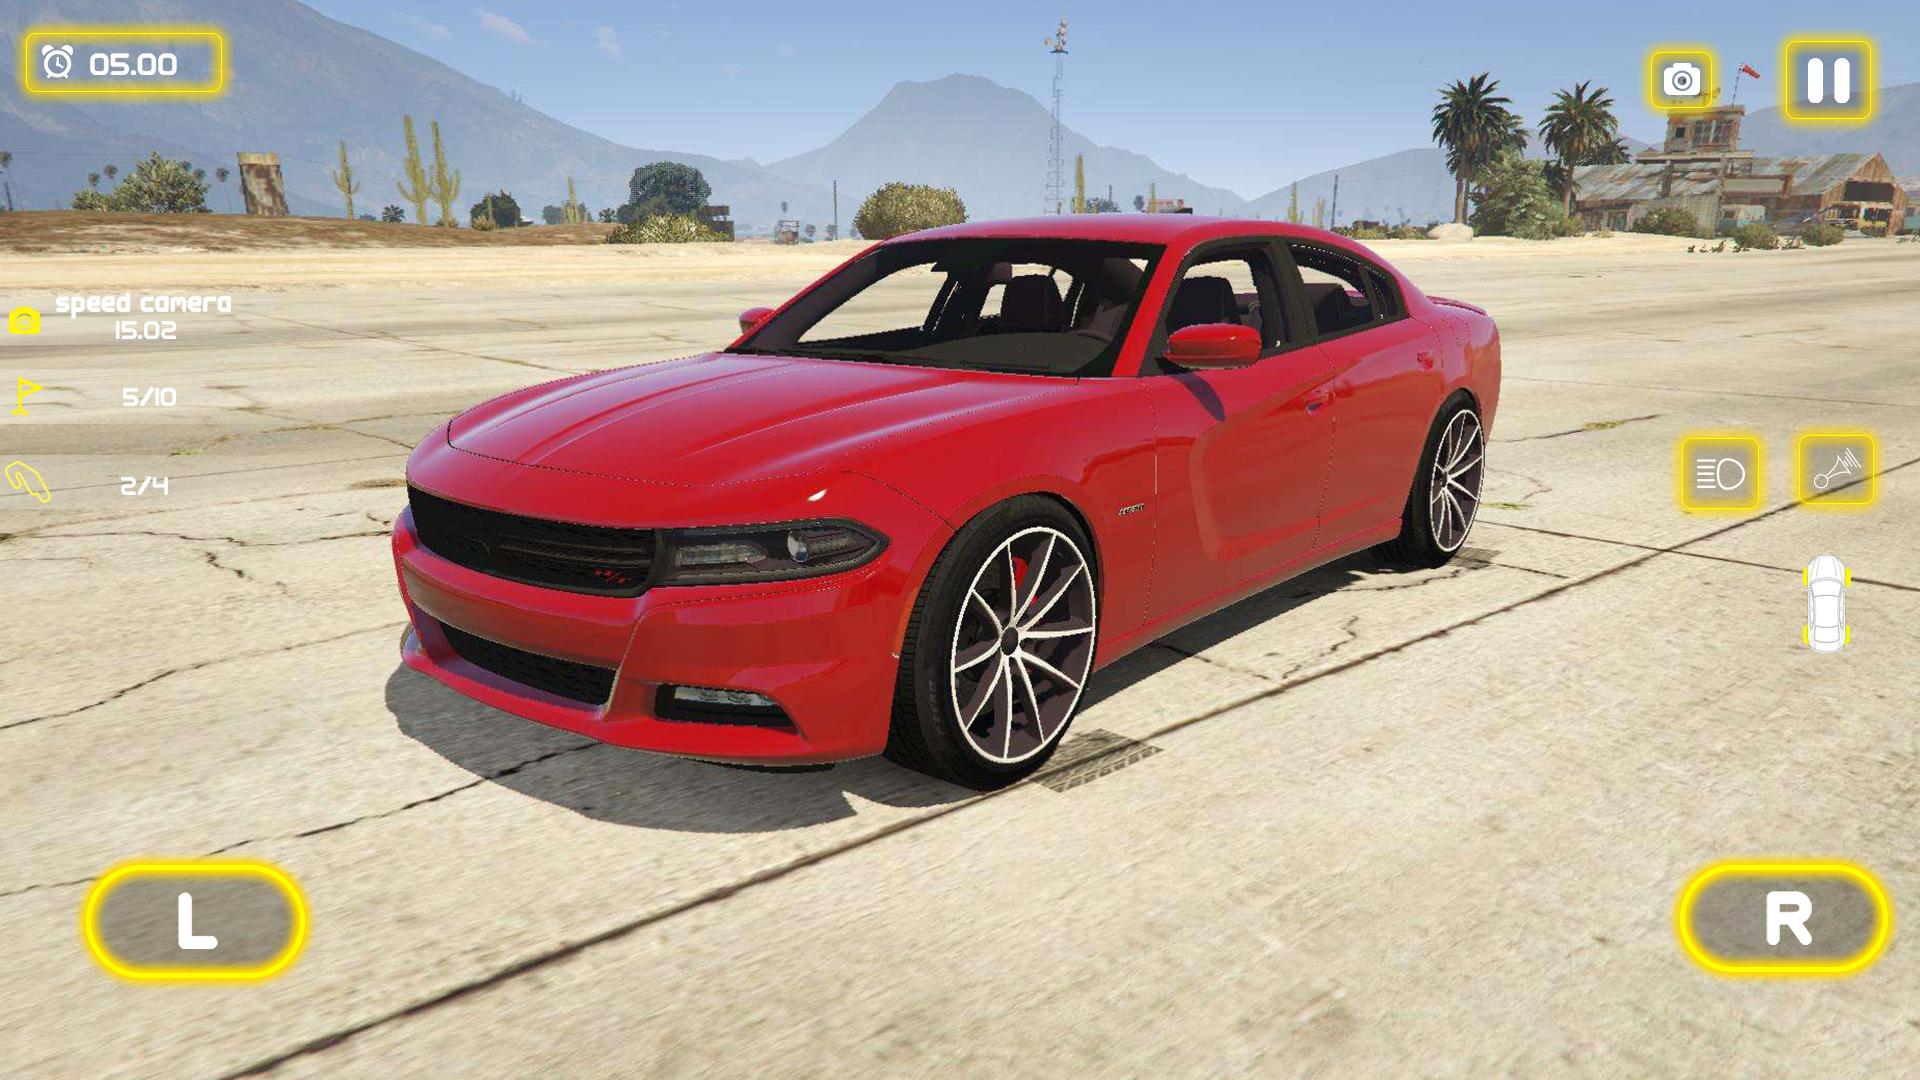 Download Extreme Car Drive :Charger SRT android on PC